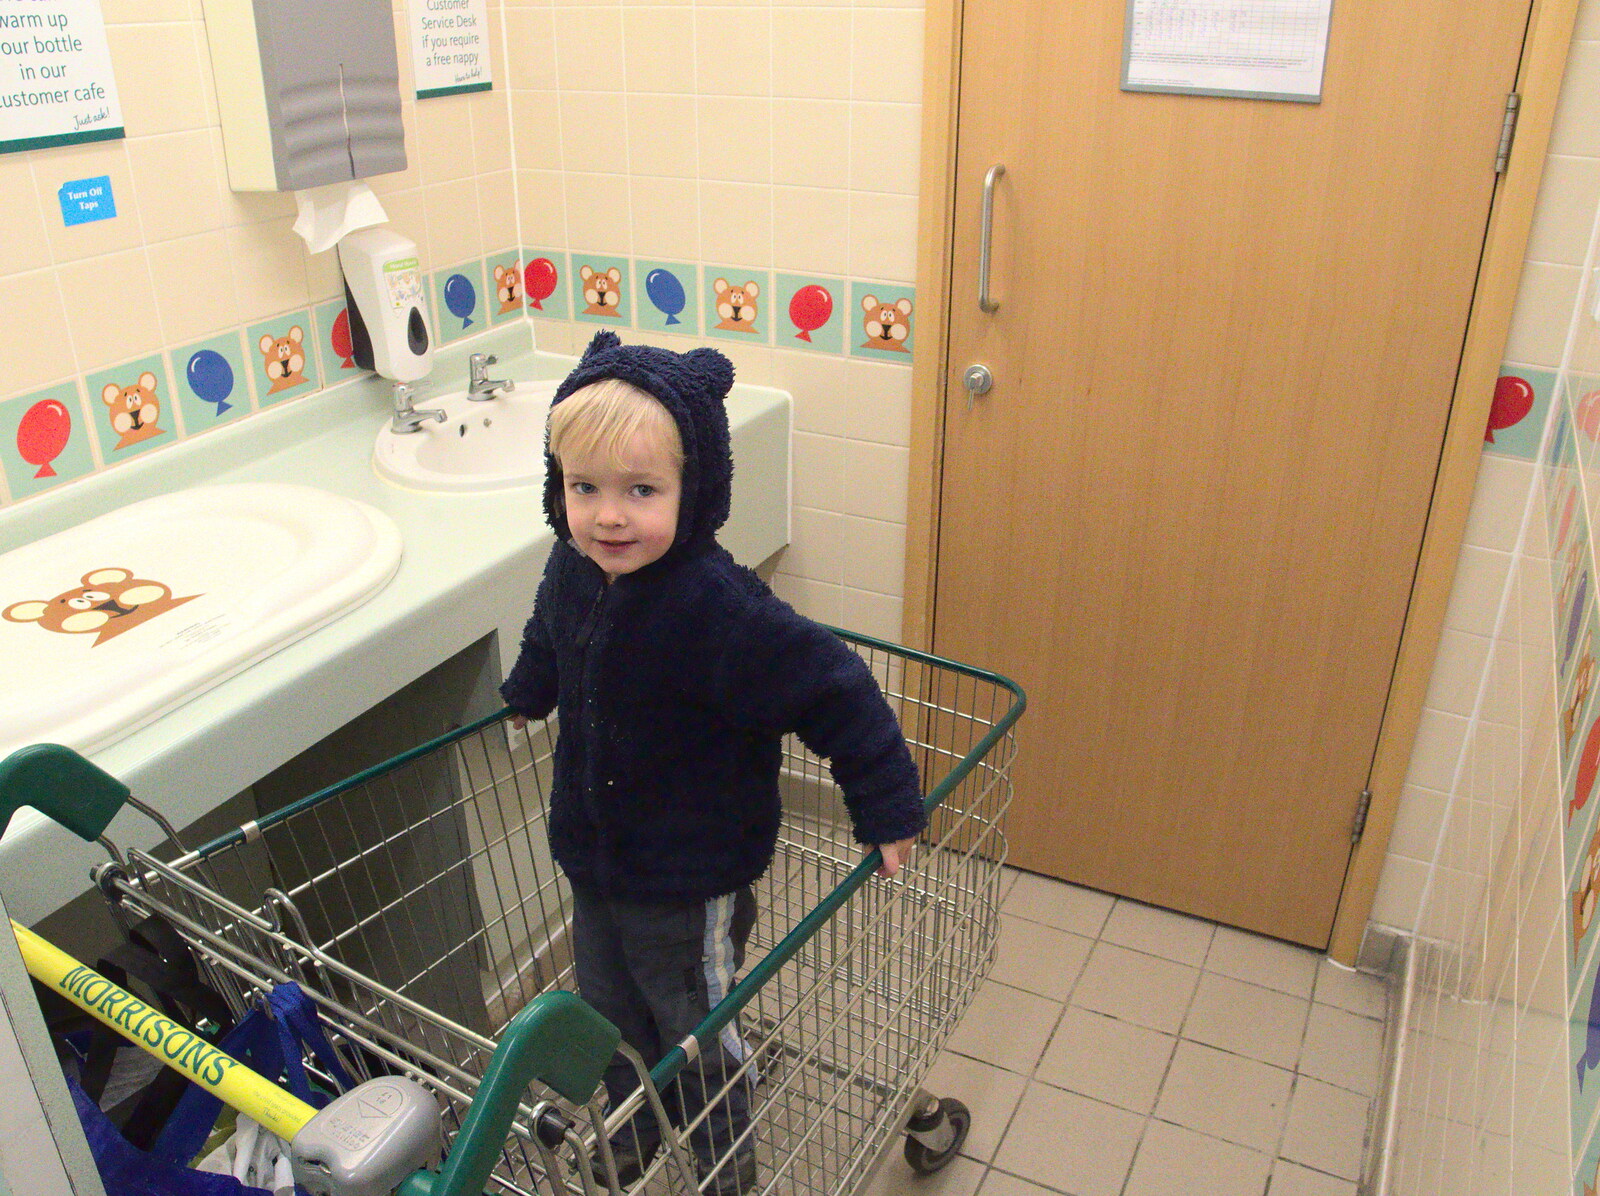 Gabes messes around in Morissons' baby-change room from Closing Down: A Late January Miscellany, Diss, Norfolk - 31st January 2015